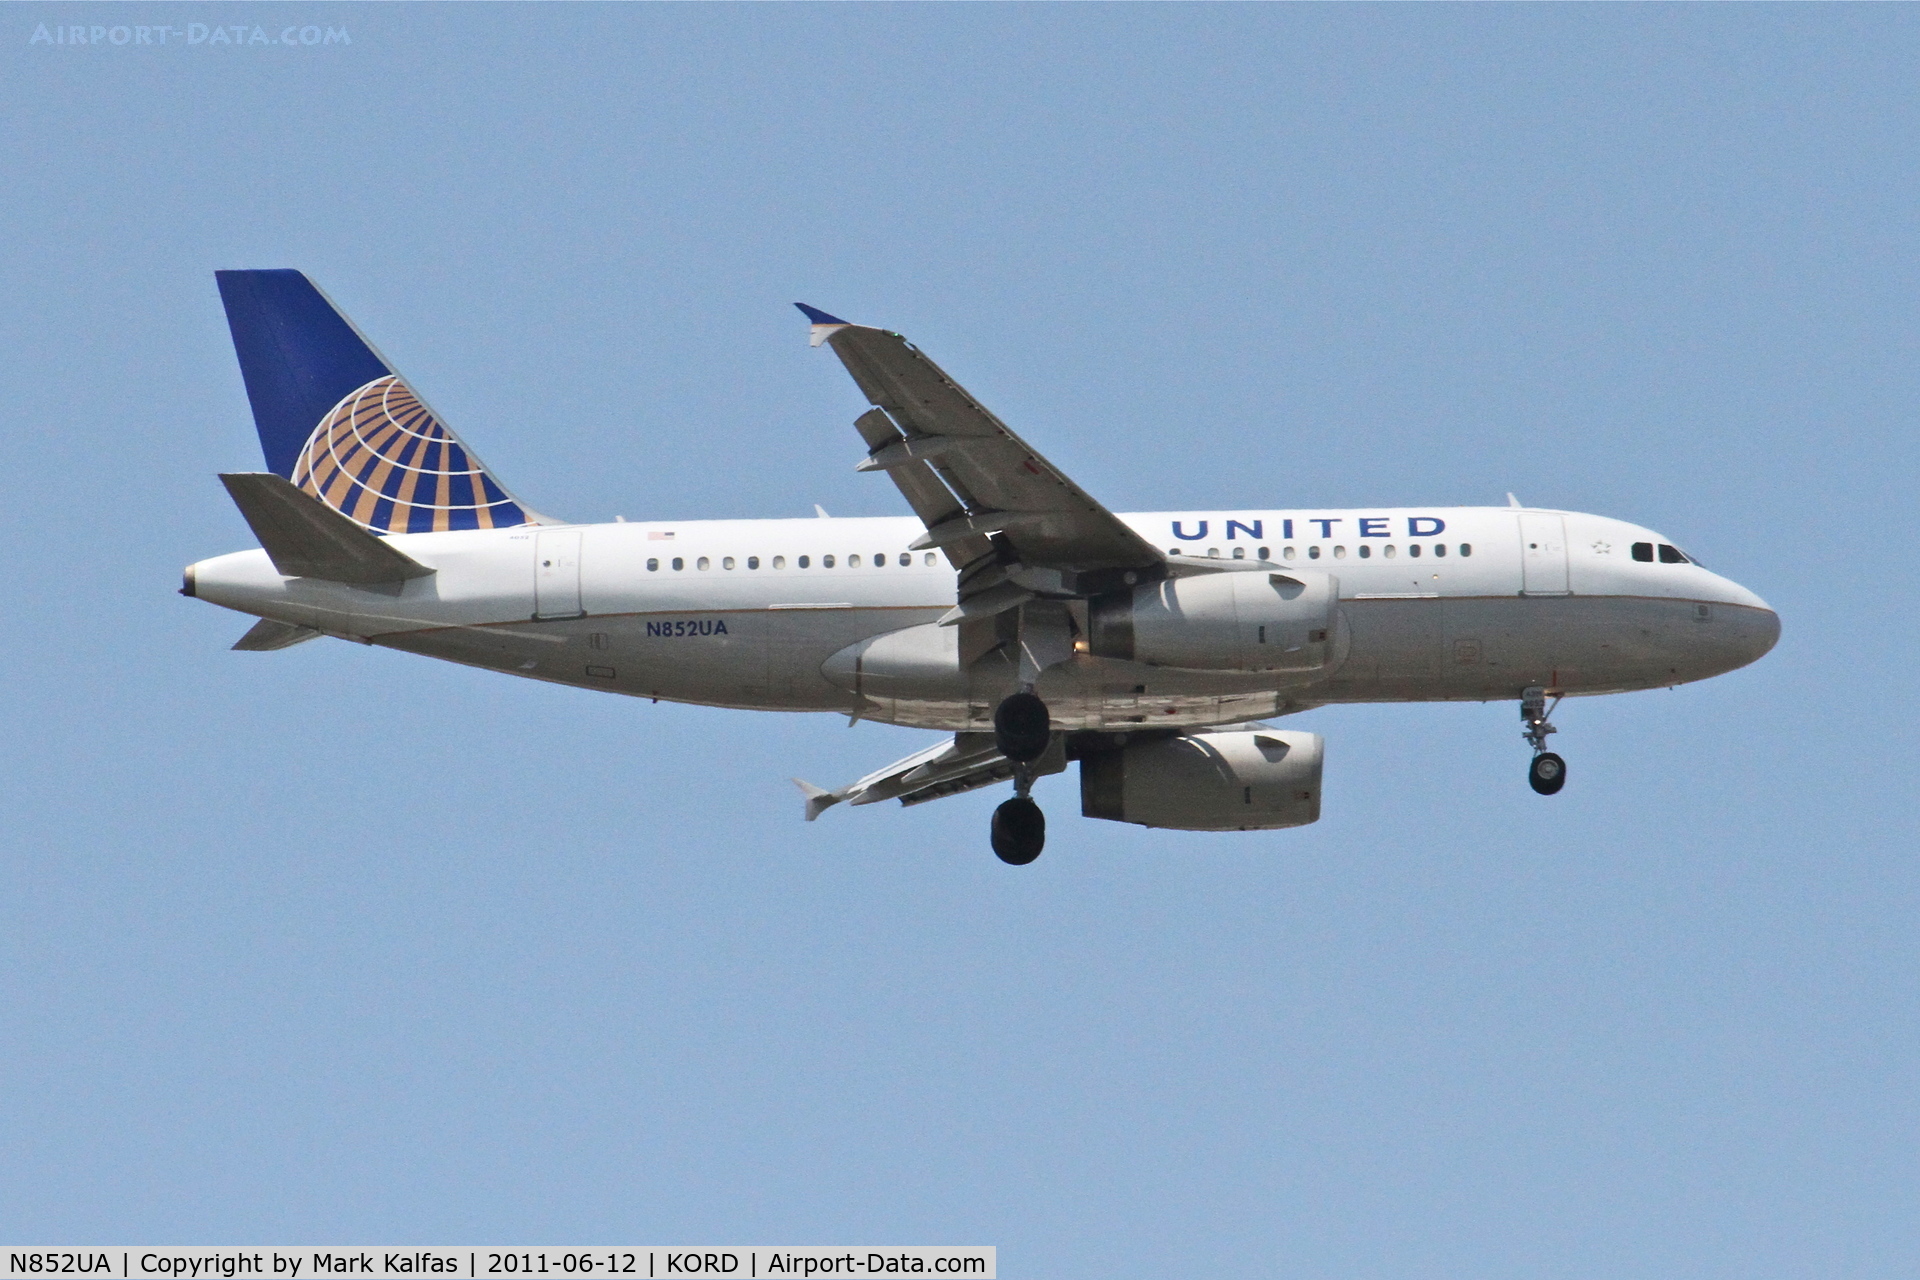 N852UA, 2002 Airbus A319-131 C/N 1671, United Airlines Airbus A319-131, UAL856 arriving from KDSM, RWY 10 approach KORD.